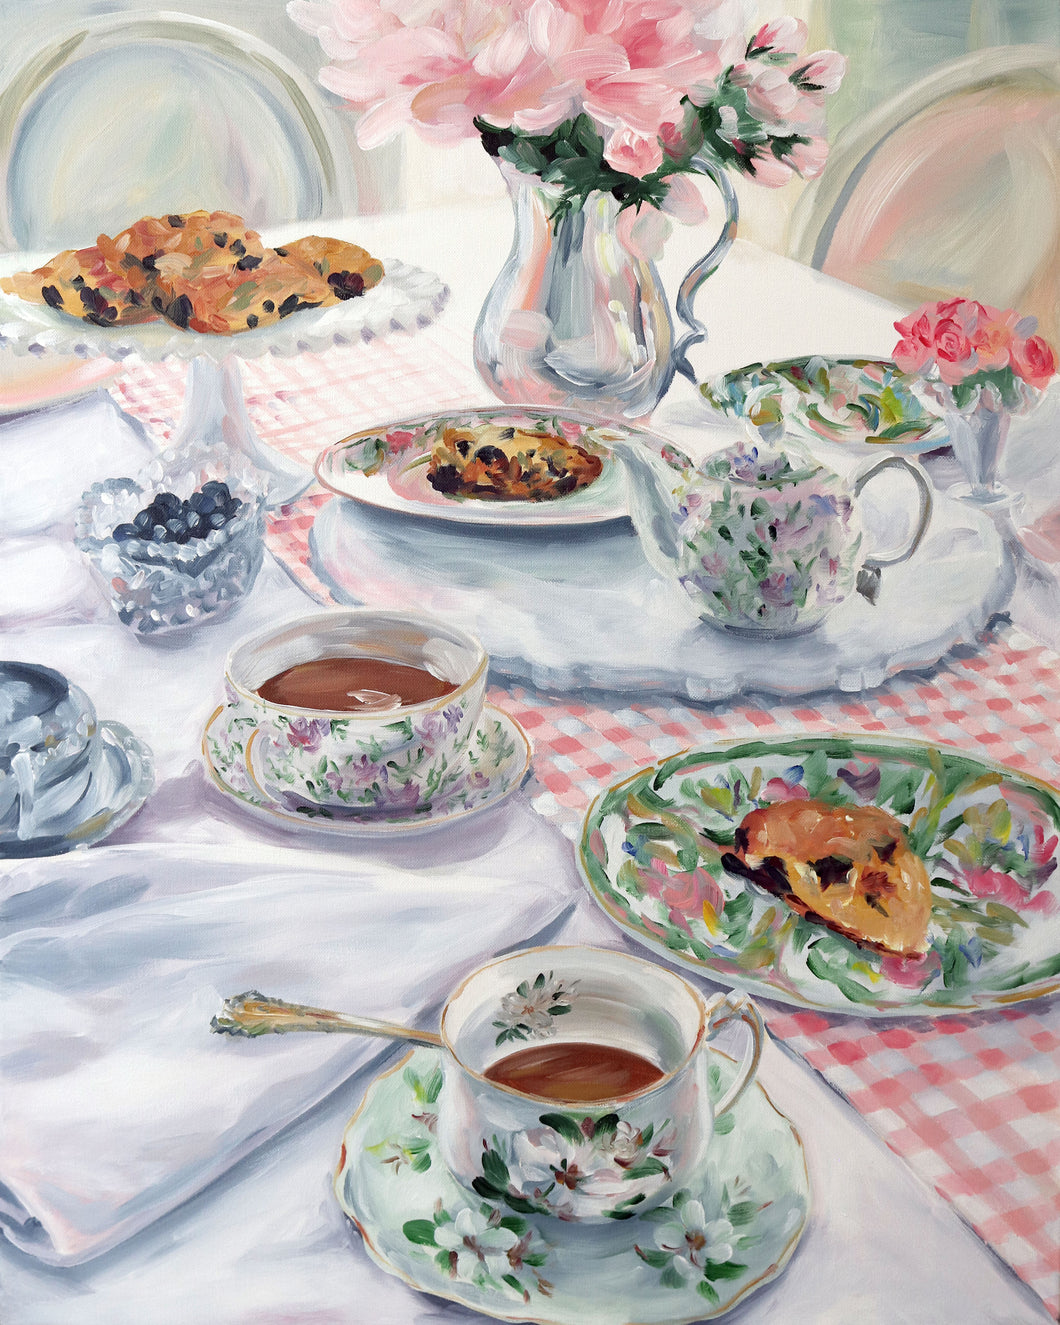 Elizabeth Alice Studio original painting, acrylic painting art, tea party scones table setting painting, art for dining room, loose brush strokes, modern updated traditional art decor, maryland artist, large original art for dining room, unique art for traditional home, pink and white painting. Magnolia Tea. Painting of tea cups, painting of tea set, painting of silverplate antiques.